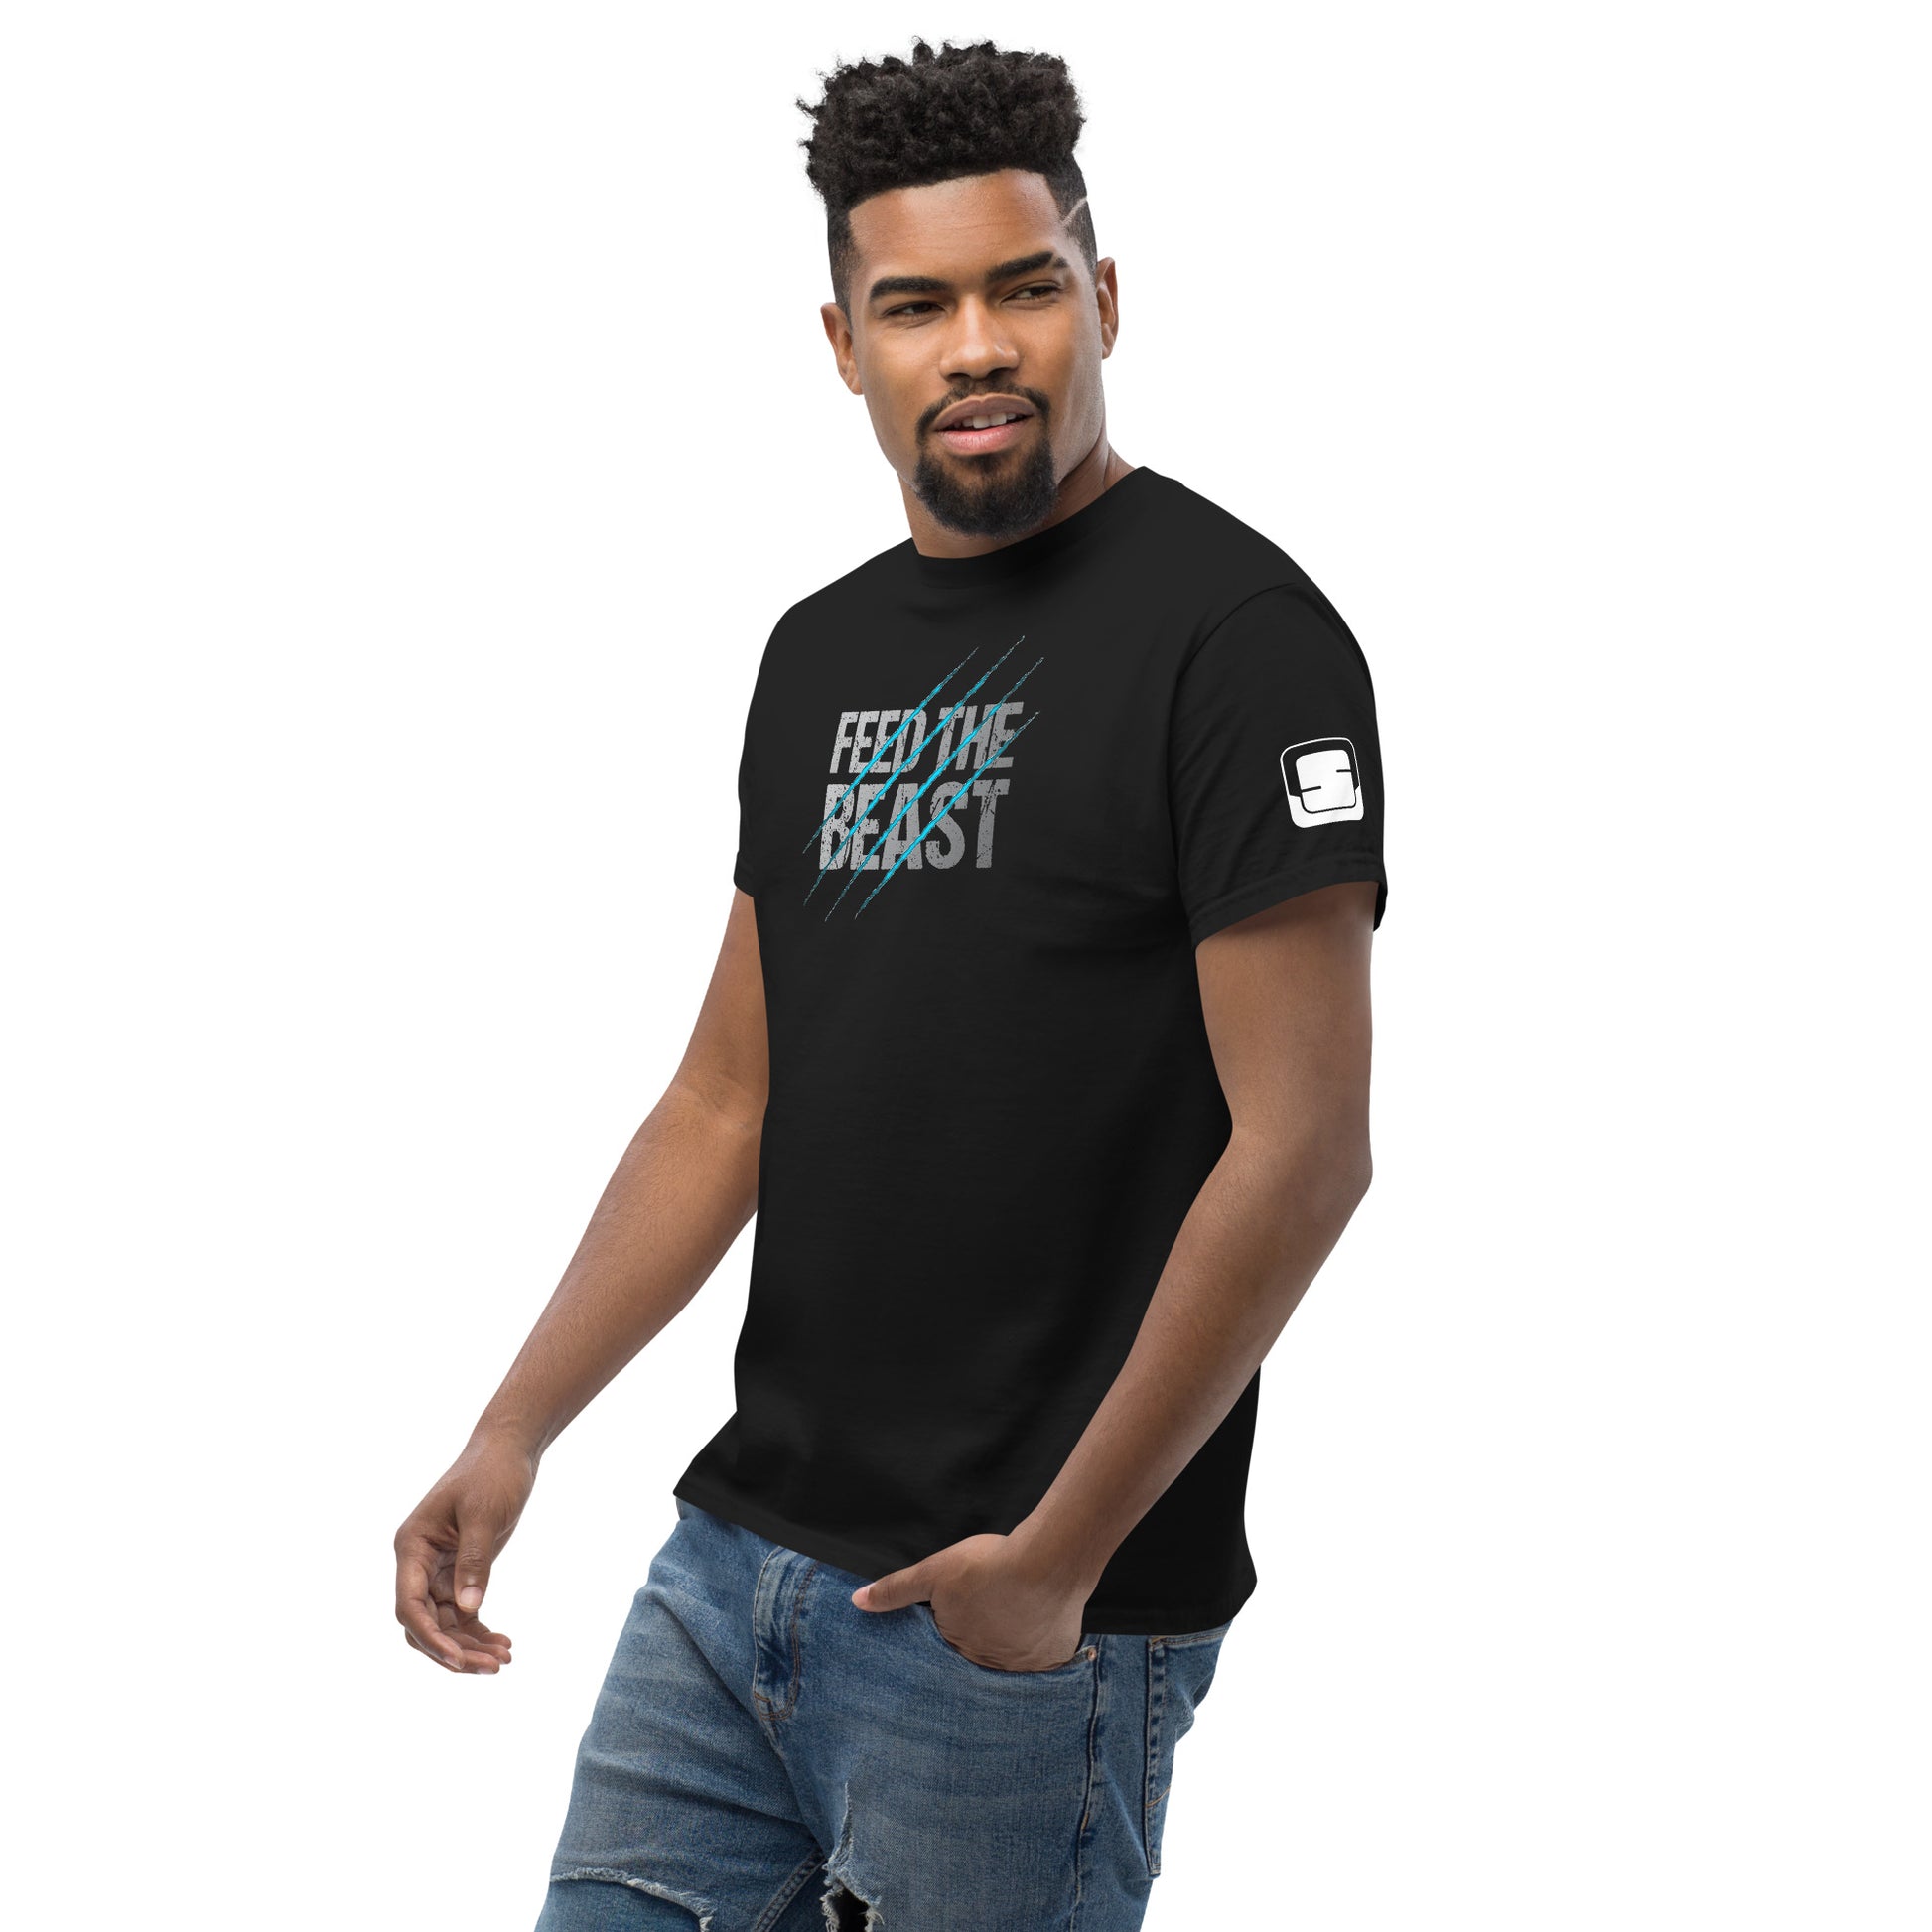 A confident young man with a short beard and stylish black hair, wearing a black t-shirt featuring the text 'FEED THE BEAST' in distressed white and blue with diagonal scratch graphics. He is paired with distressed blue jeans and poses with one hand on his hip, looking slightly to the side.